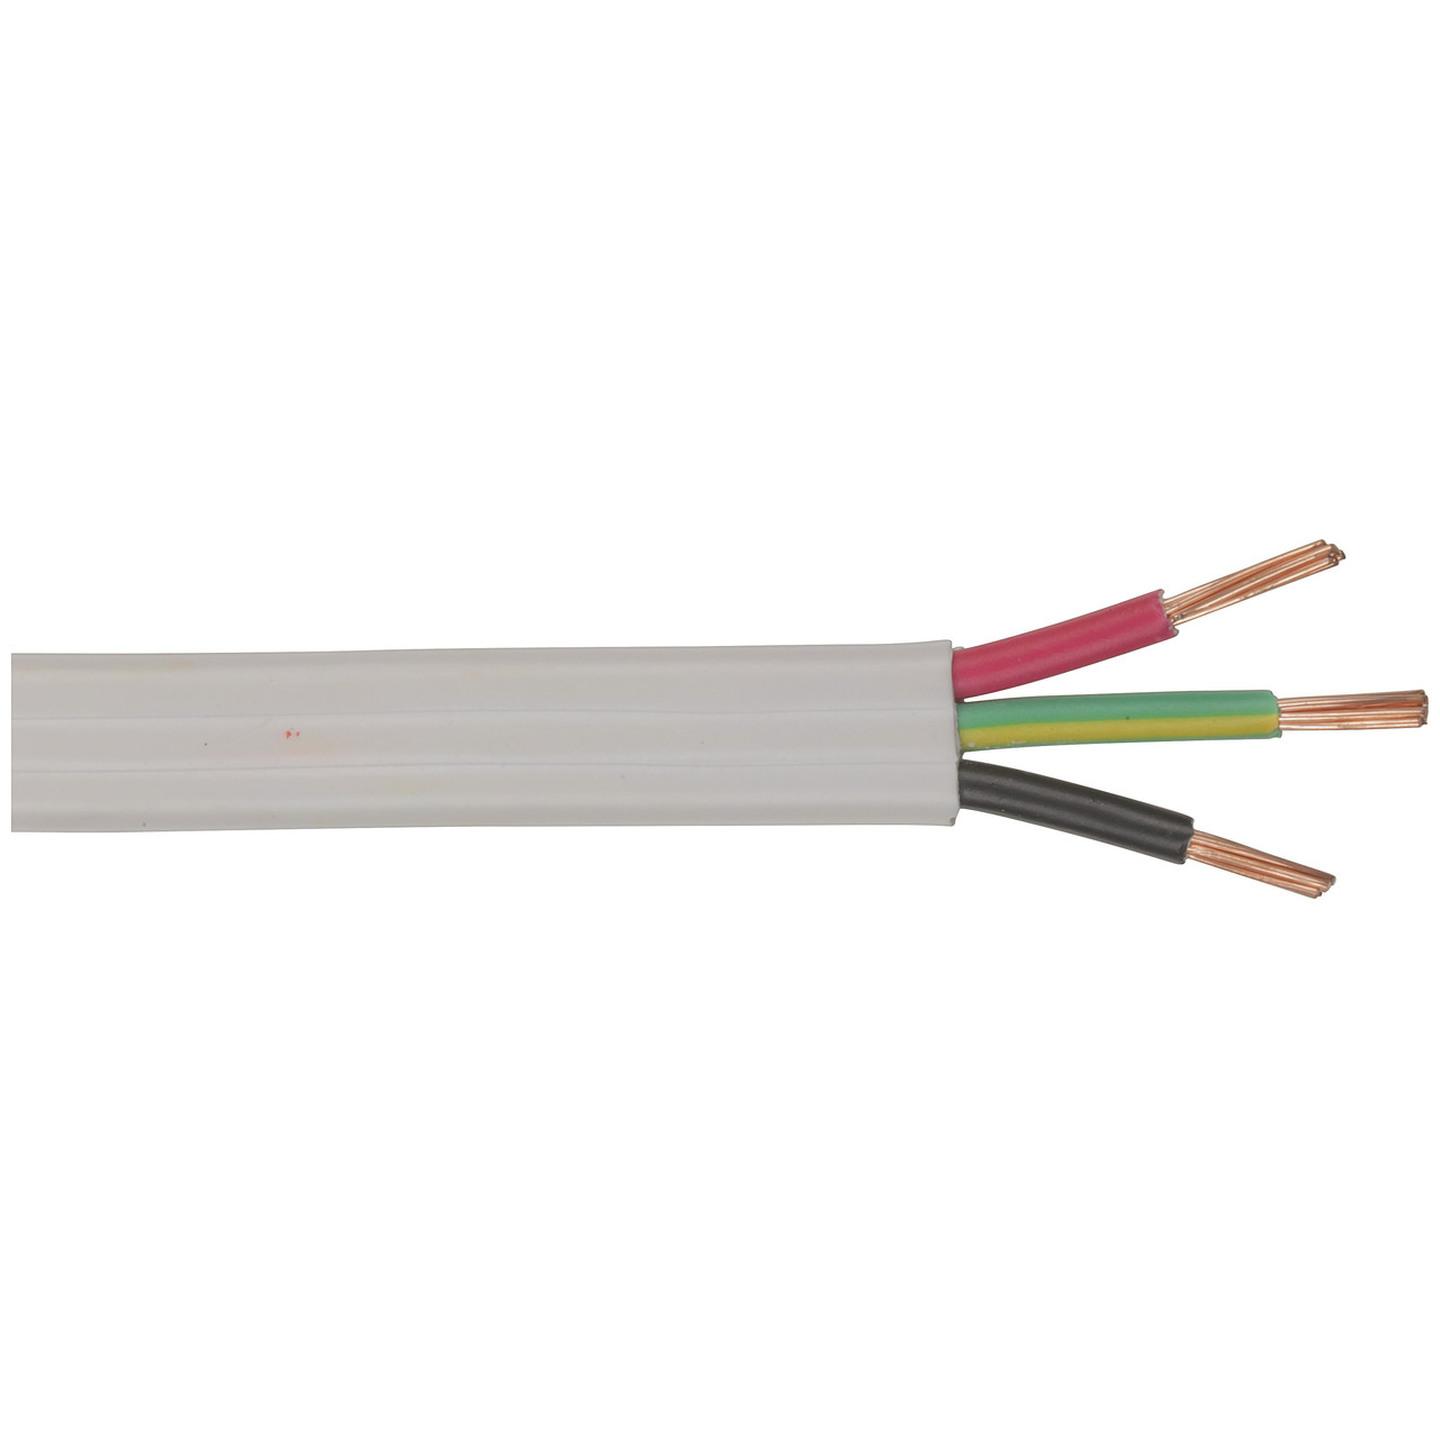 Mains 20A Twin and Earth Power Cable